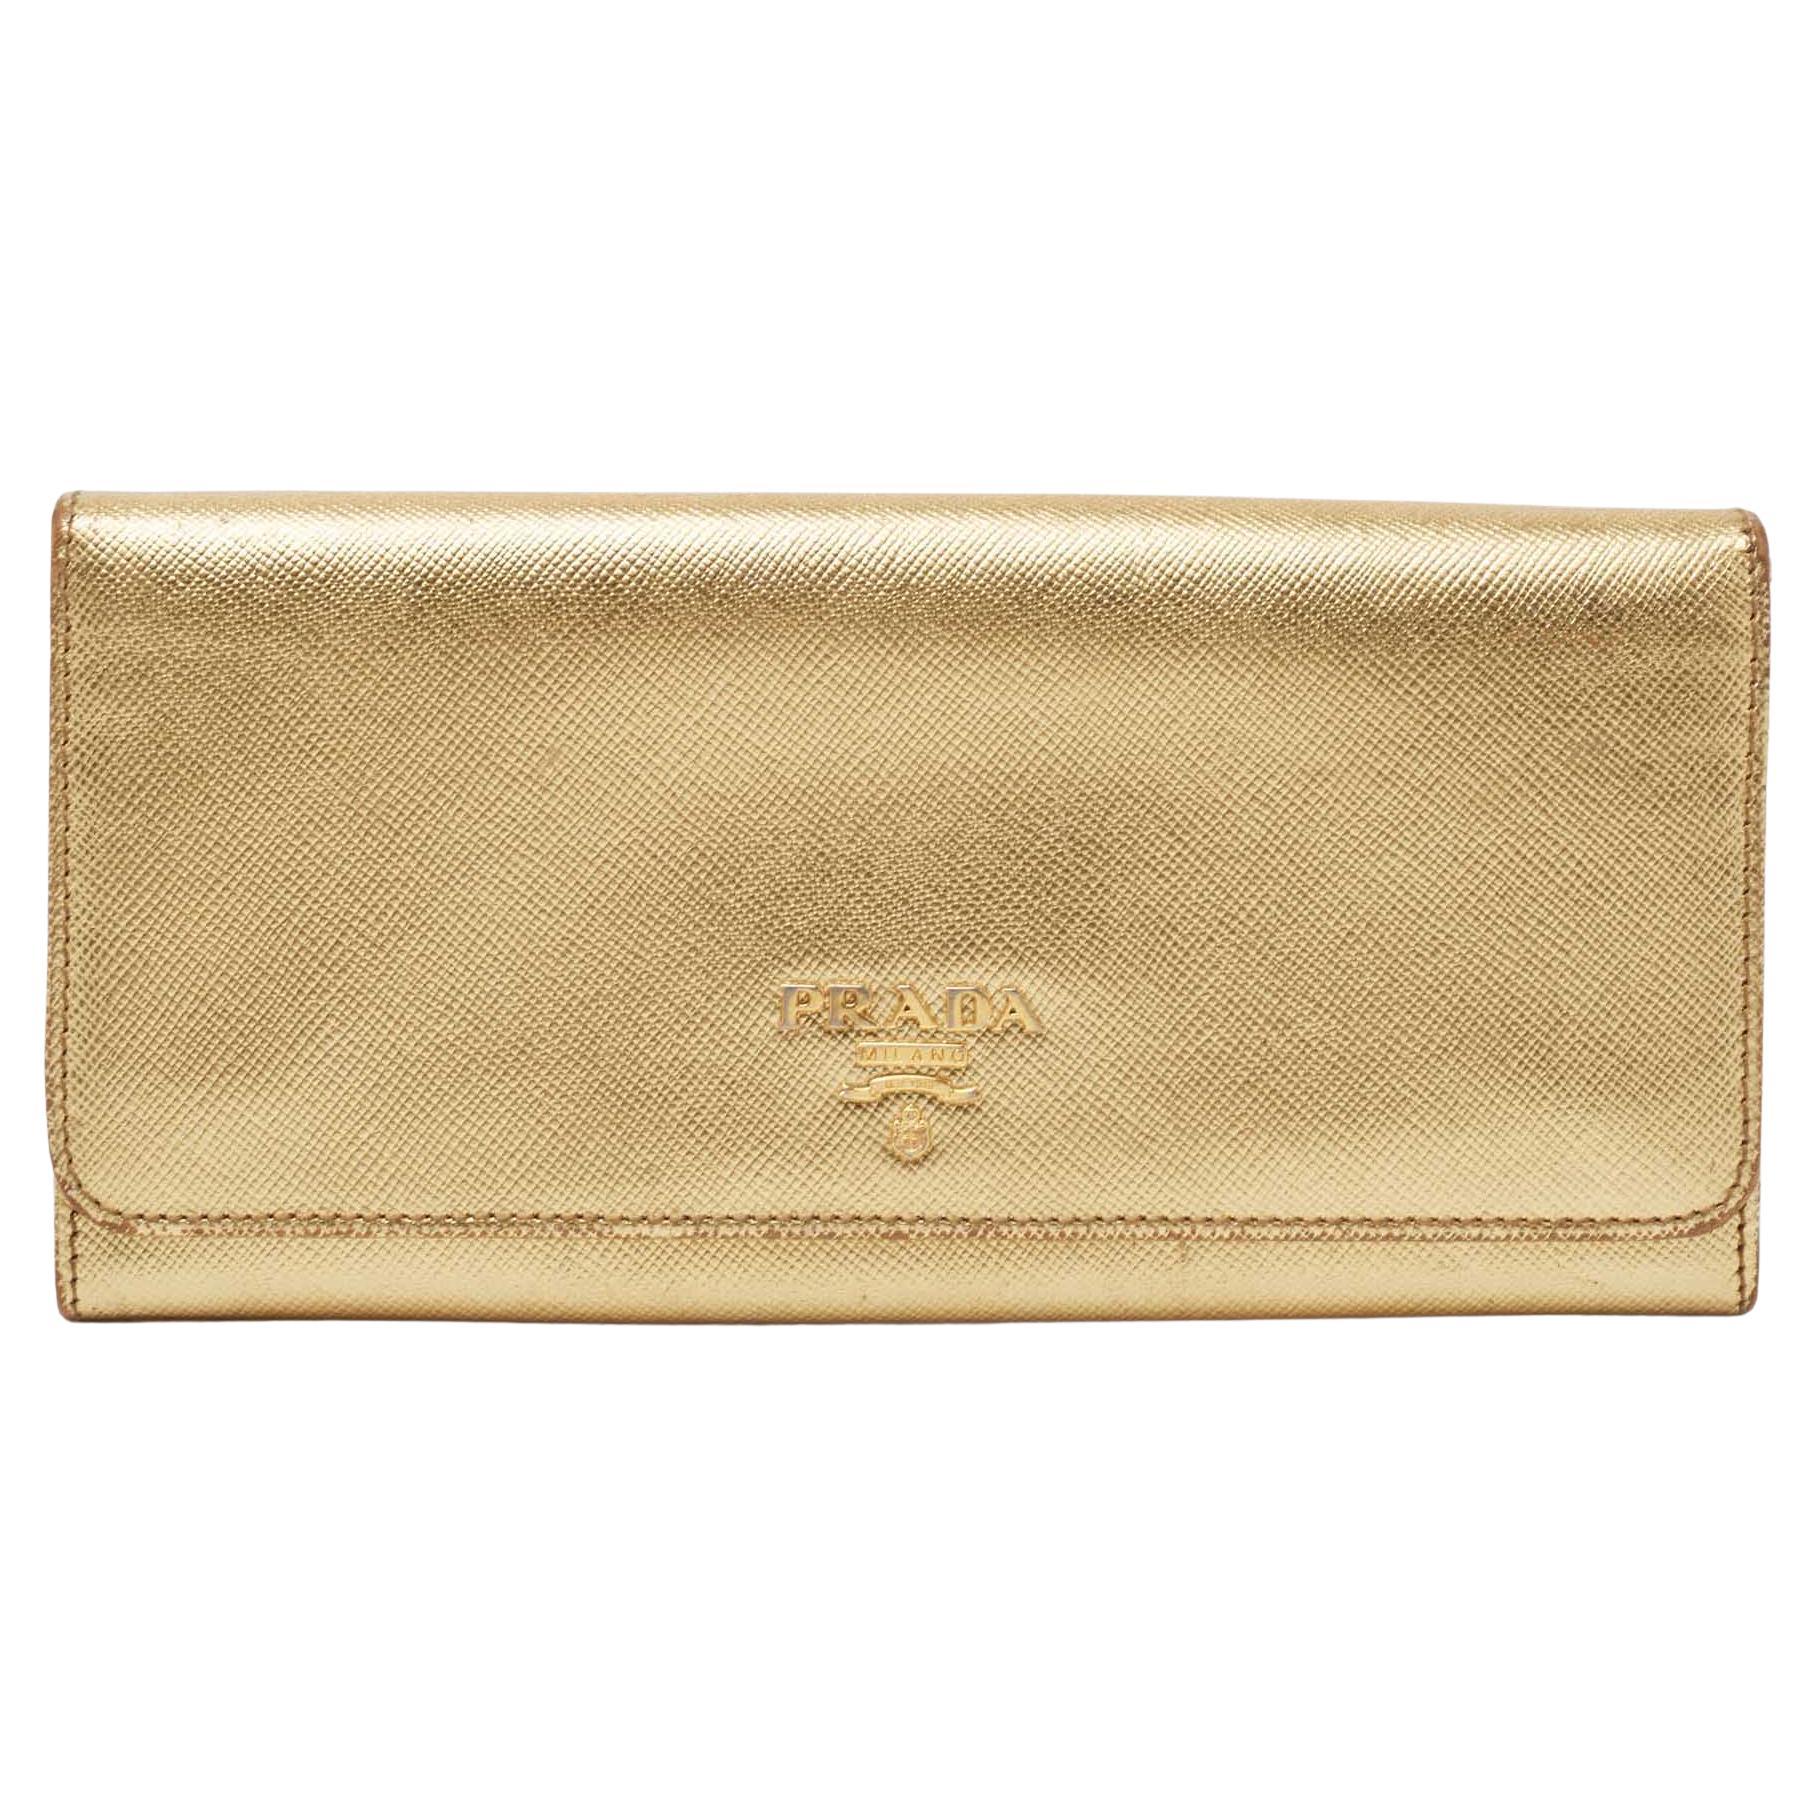 Prada Gold Saffiano Lux Leather Logo Flap Continental Wallet